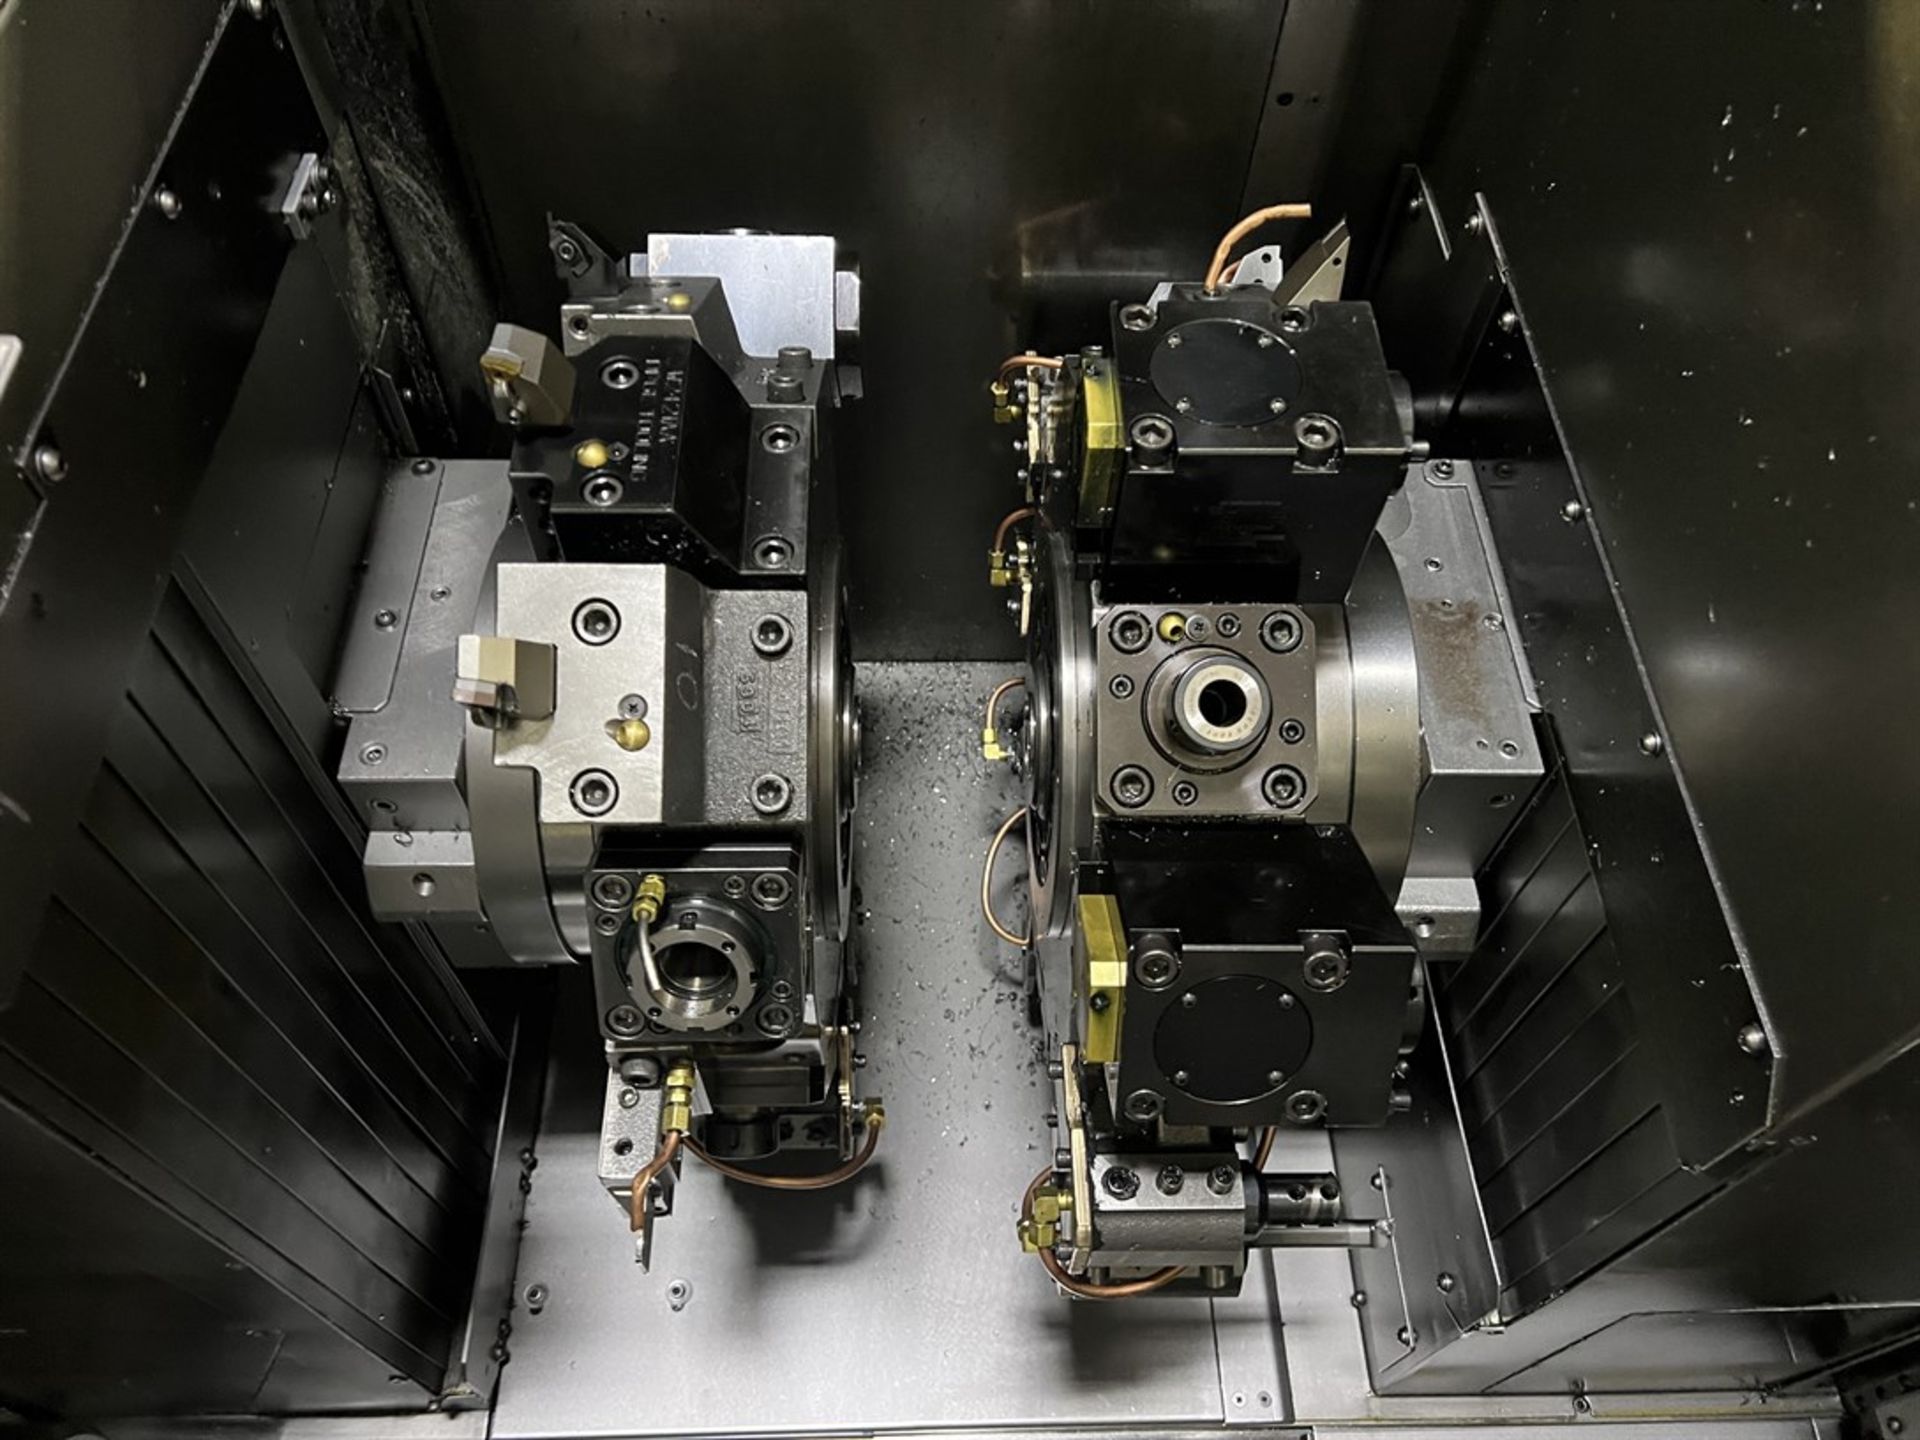 NAKAMURA-TOME TW-20 CNC Opposed Spindle Turning Center, s/n (2), Nakamura-Tome LUCK-BEI Controls, - Image 4 of 11